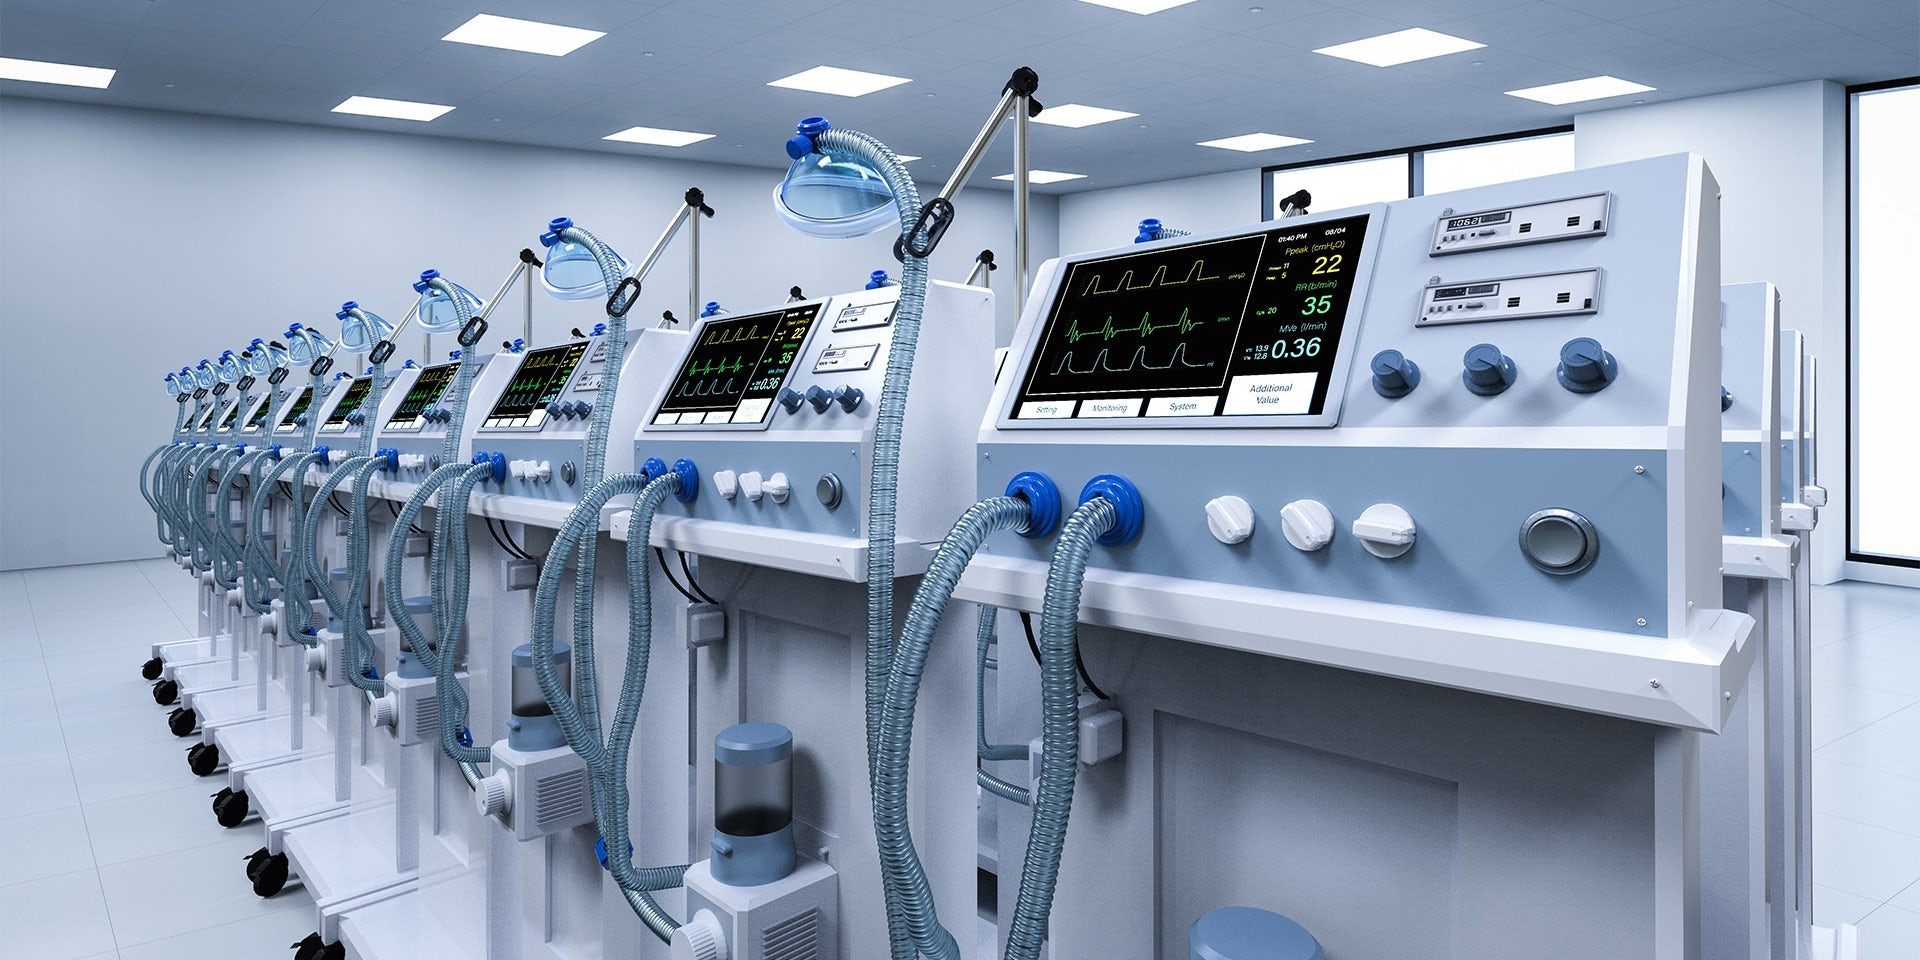 A row of medical devices